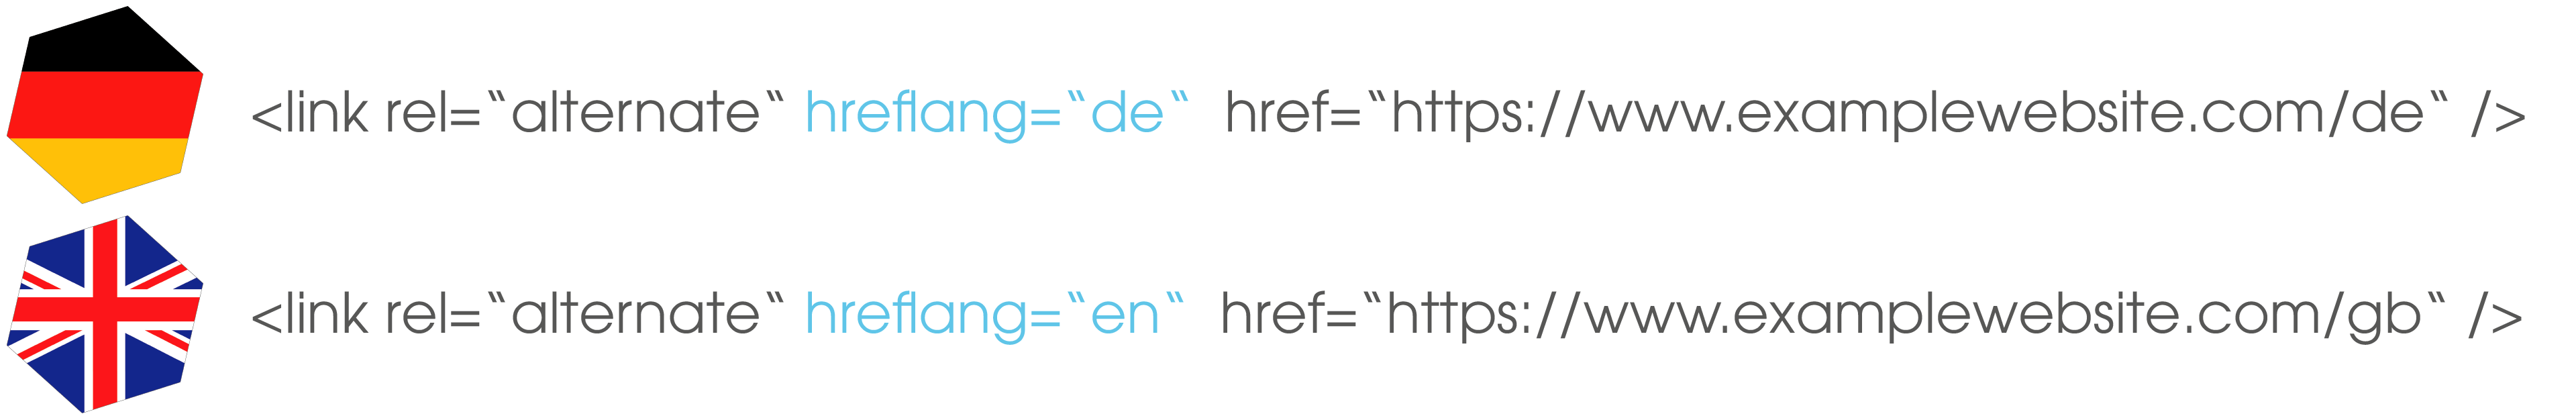 The image shows a German and an English example of a link element including hreflang attribute without specific country alignment.